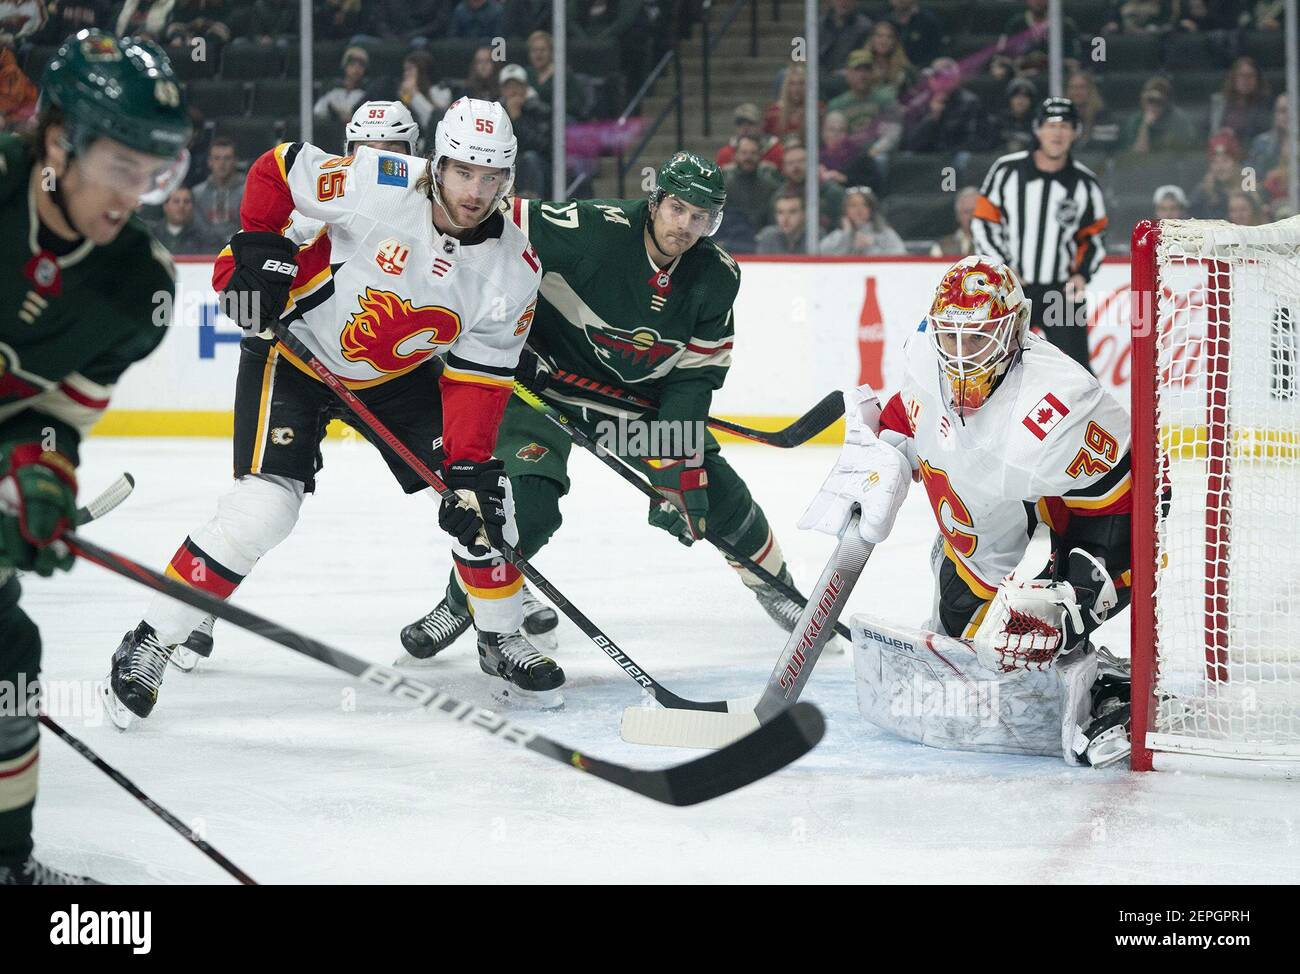 Minnesota Wild left wing Marcus Foligno (17) watches for a centering pass in front of Calgary Flames goaltender Cam Talbot (39) while defended by Flames defenseman Noah Hanifin (55) in the first period Monday, Dec. 23, 2019 at Xcel Energy Center in St. Paul, Minn. The Wild won 3-0. (Photo by Jeff Wheeler/Minneapolis Star Tribune/TNS/Sipa USA) Stock Photo